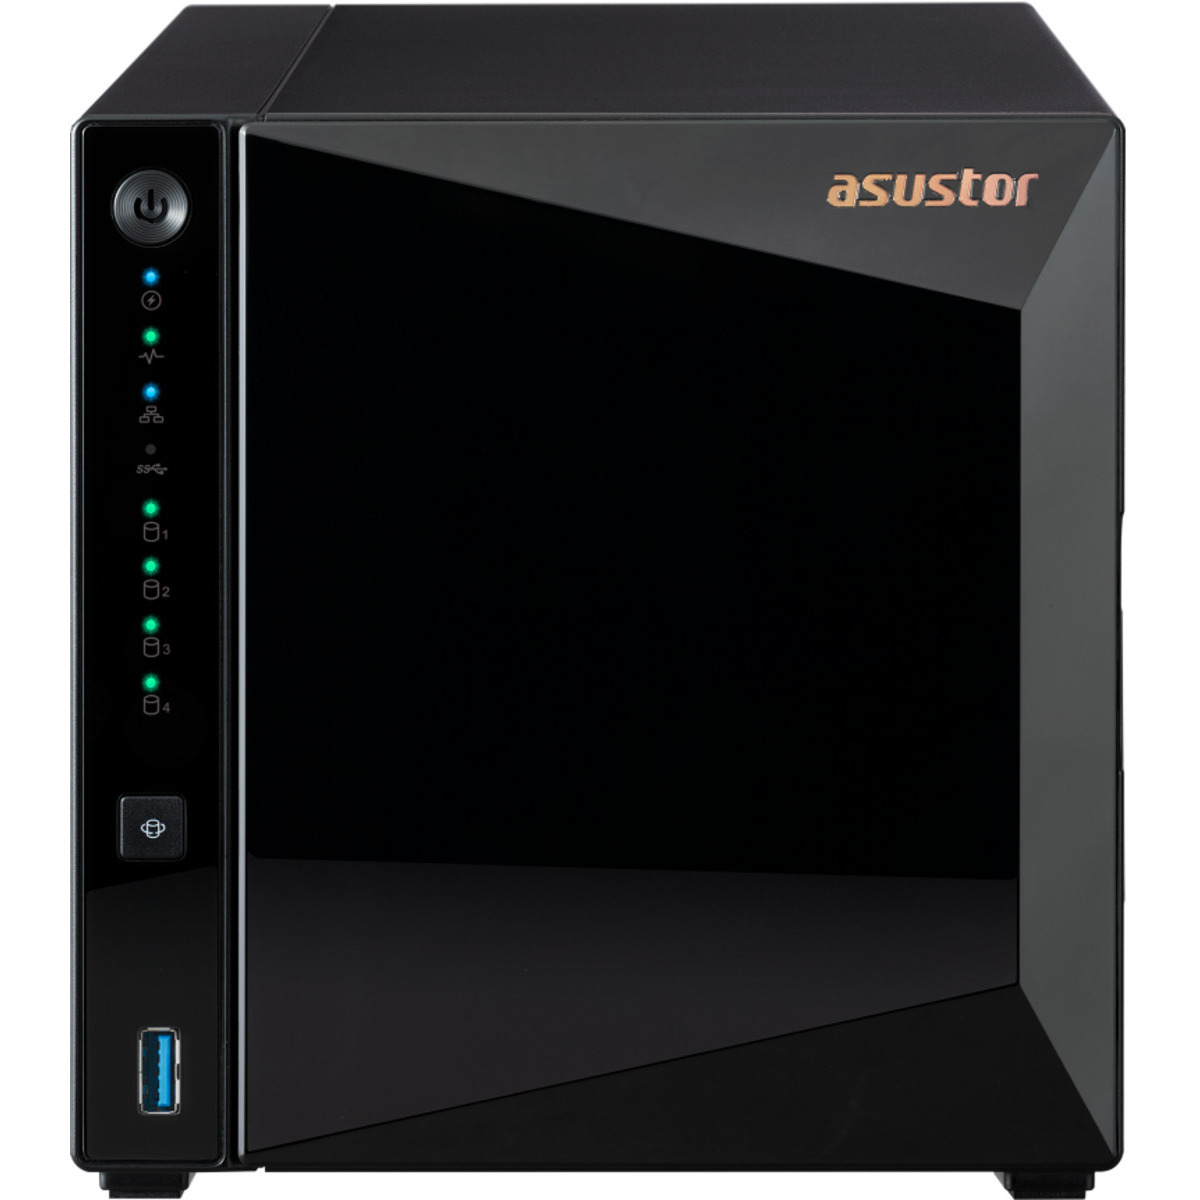 ASUSTOR AS3304T v2 NAS - Network Attached Storage Device Burn-In Tested Configurations